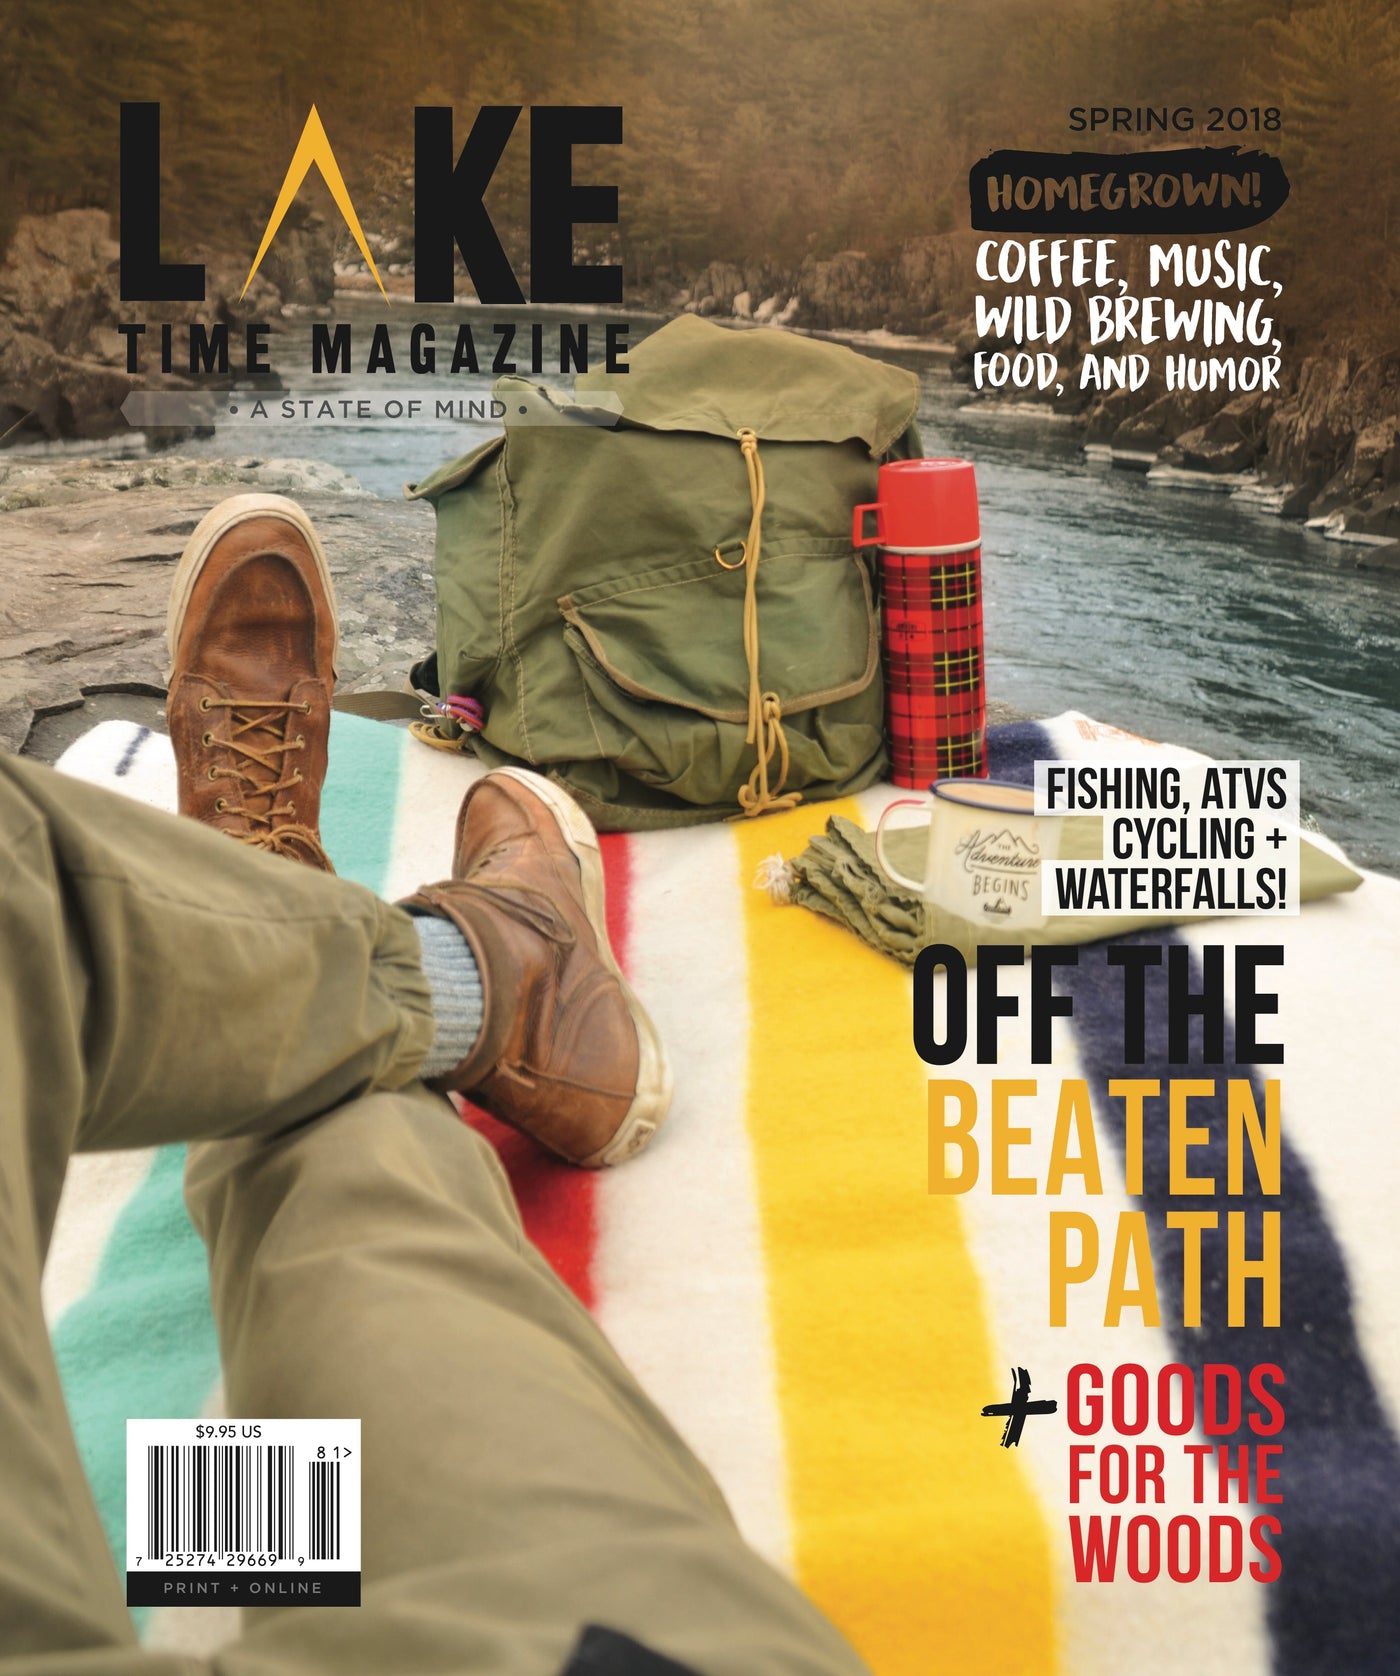 Lake Time Magazine: Issue 11 - The Lake and Company